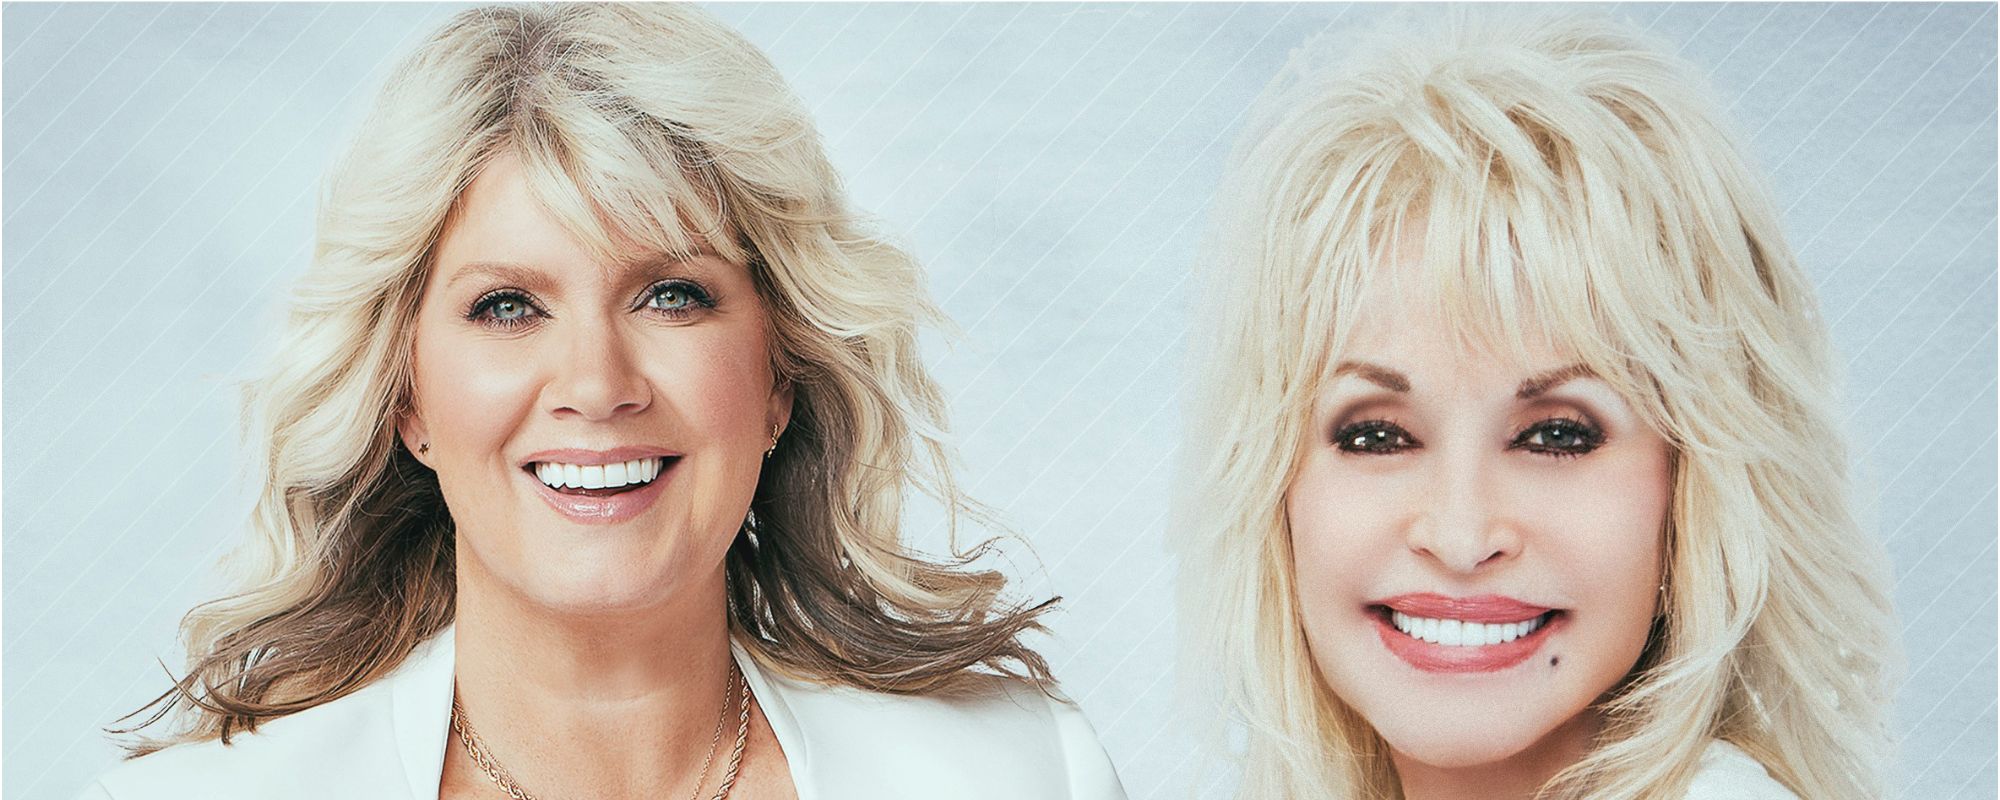 Natalie Grant and Dolly Parton Cover Whitney Houston’s “Step by Step”